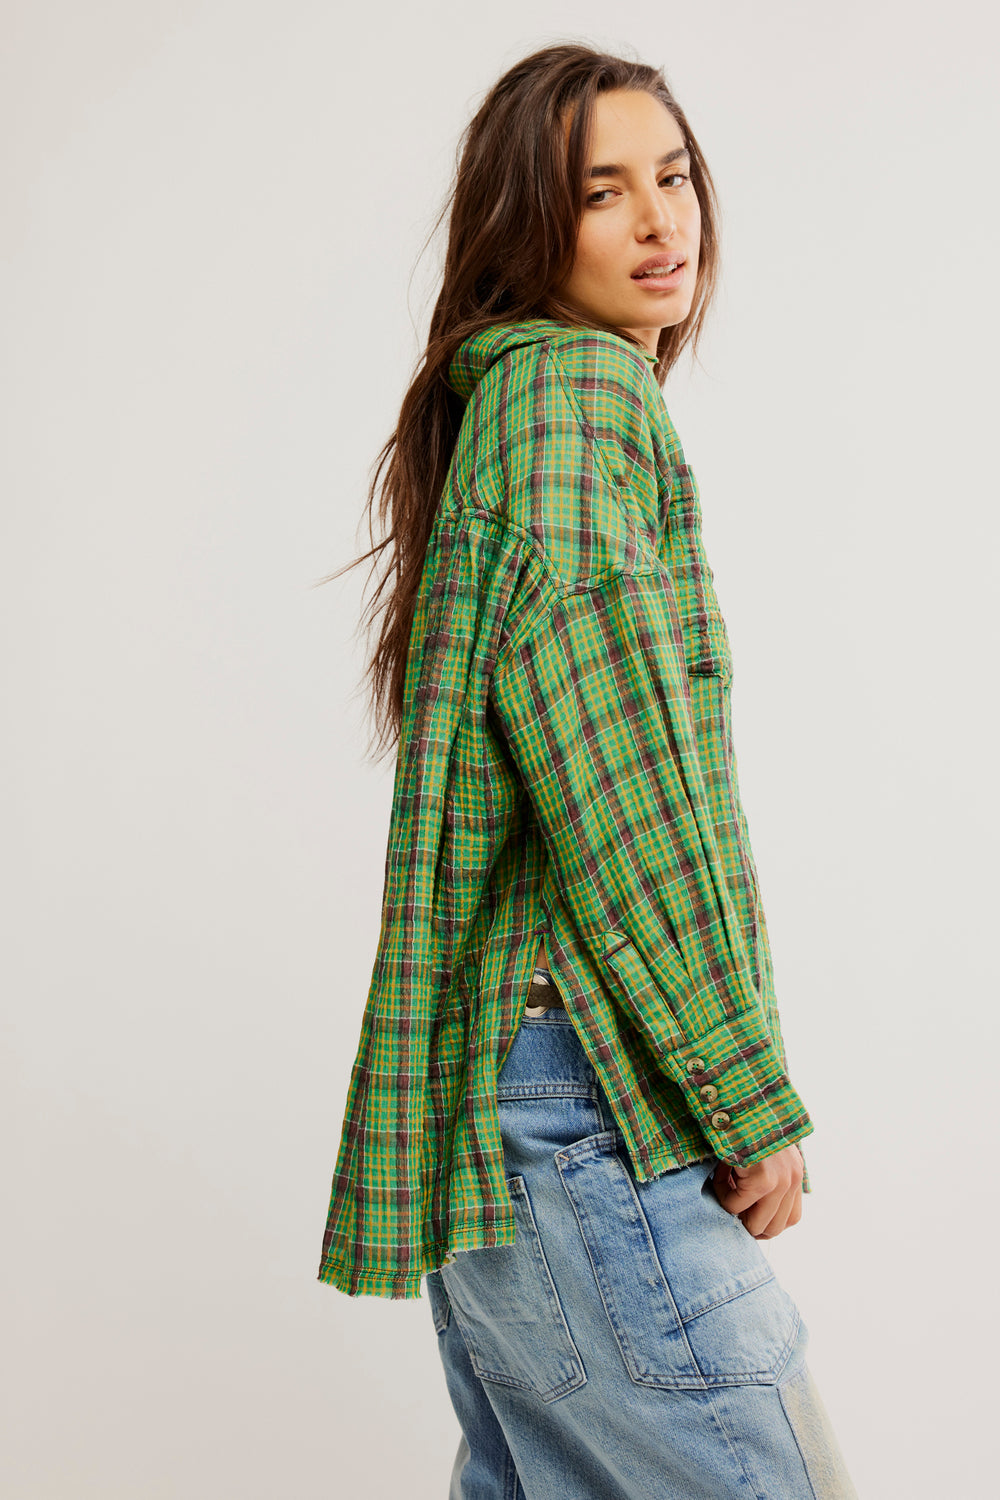 Free People We The Free Cardiff Plaid Top